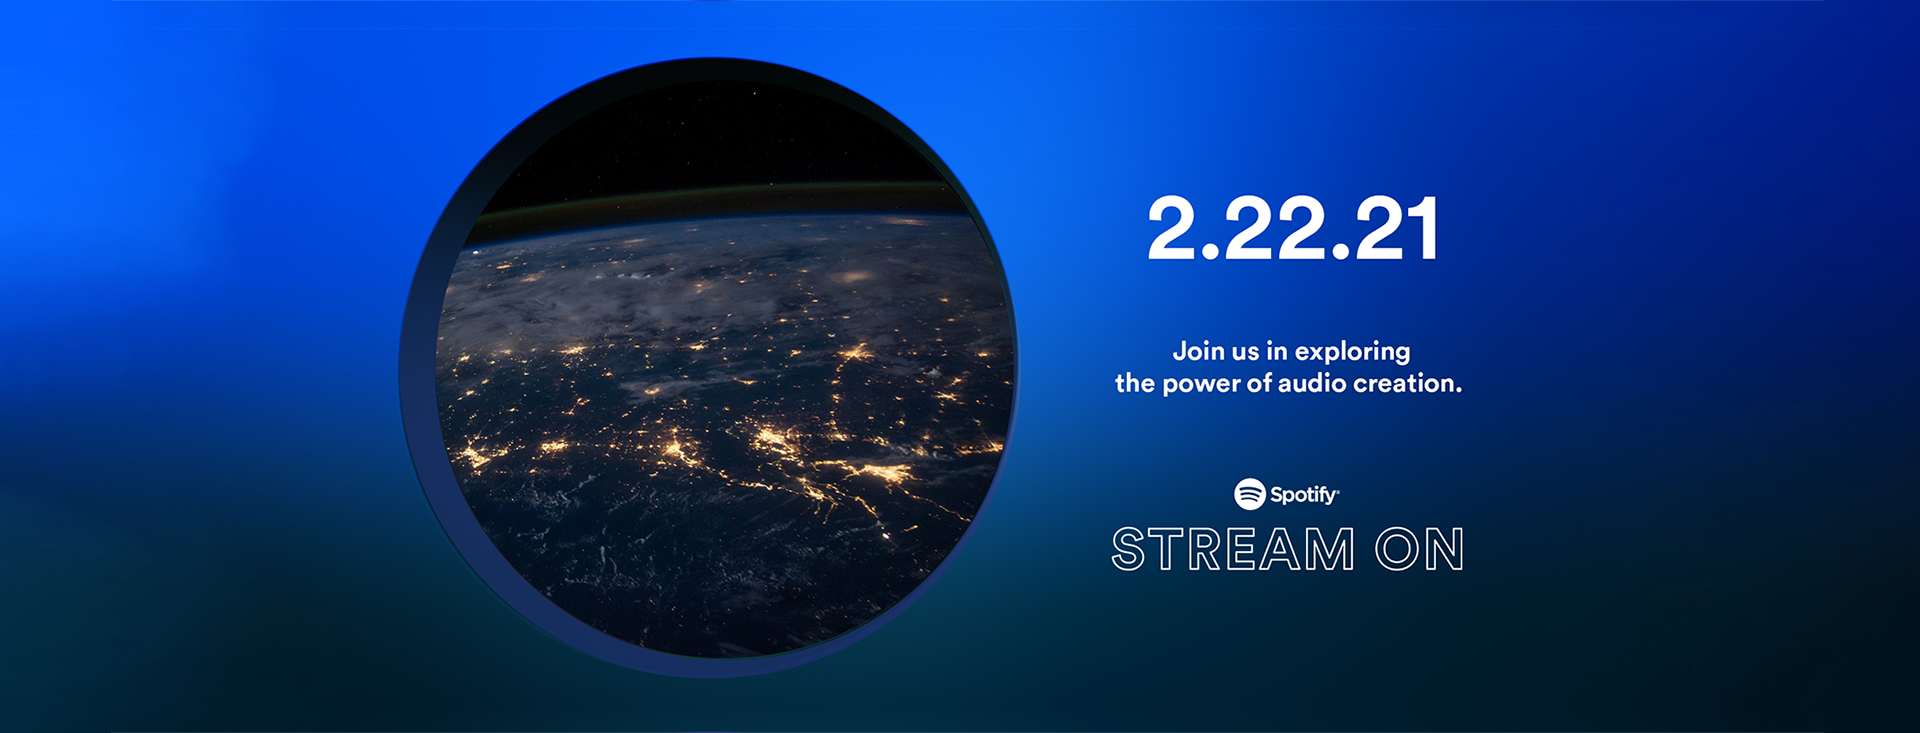 What’s next for Spotify? Tune in to their global Stream On event to find out